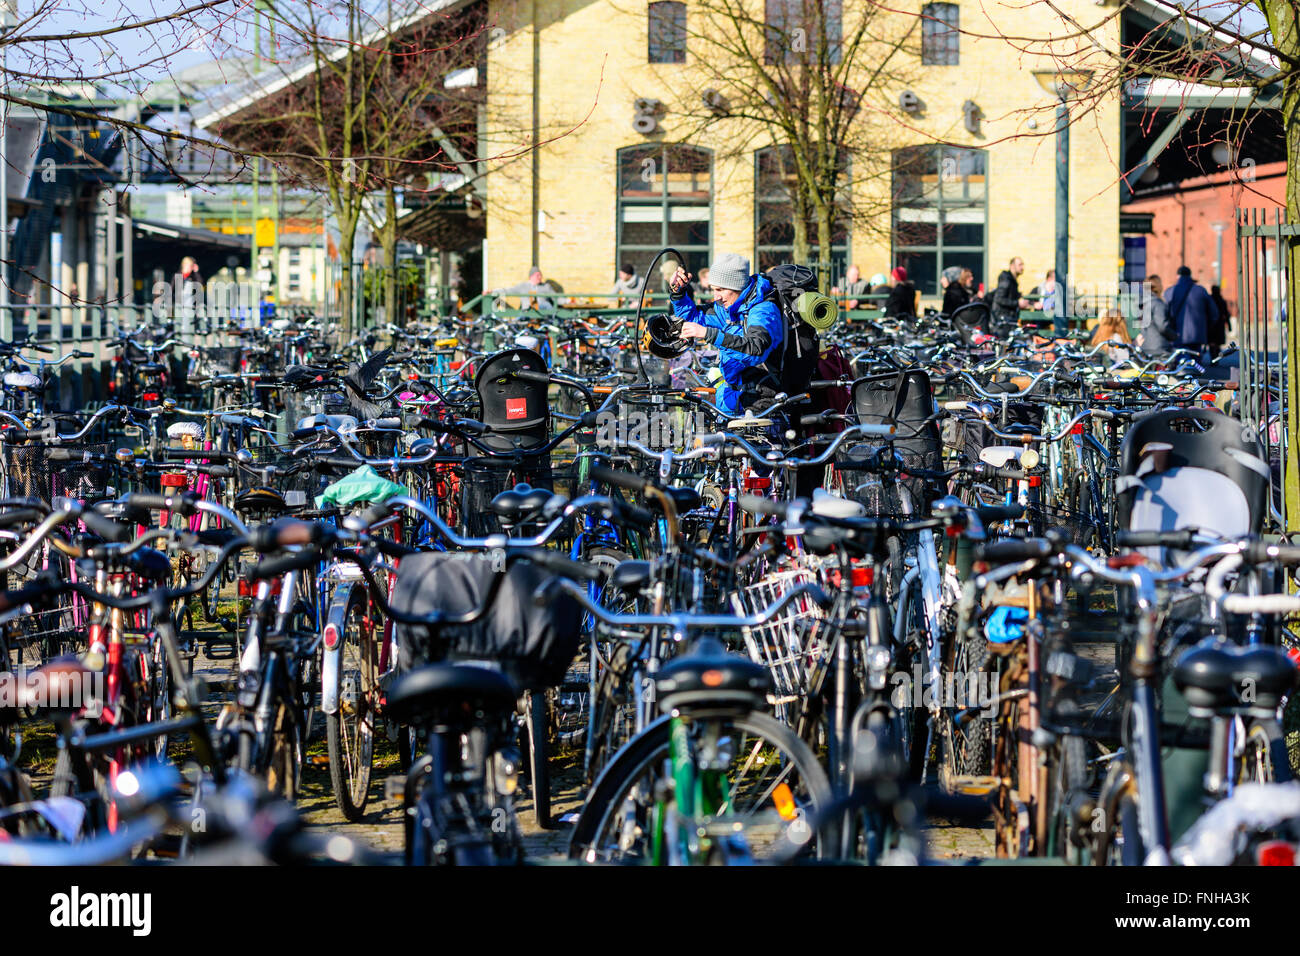 Lund, Sweden - March 12, 2016: Person with backpack standing among lots of bicycles at the bike parking lot outside the train st Stock Photo